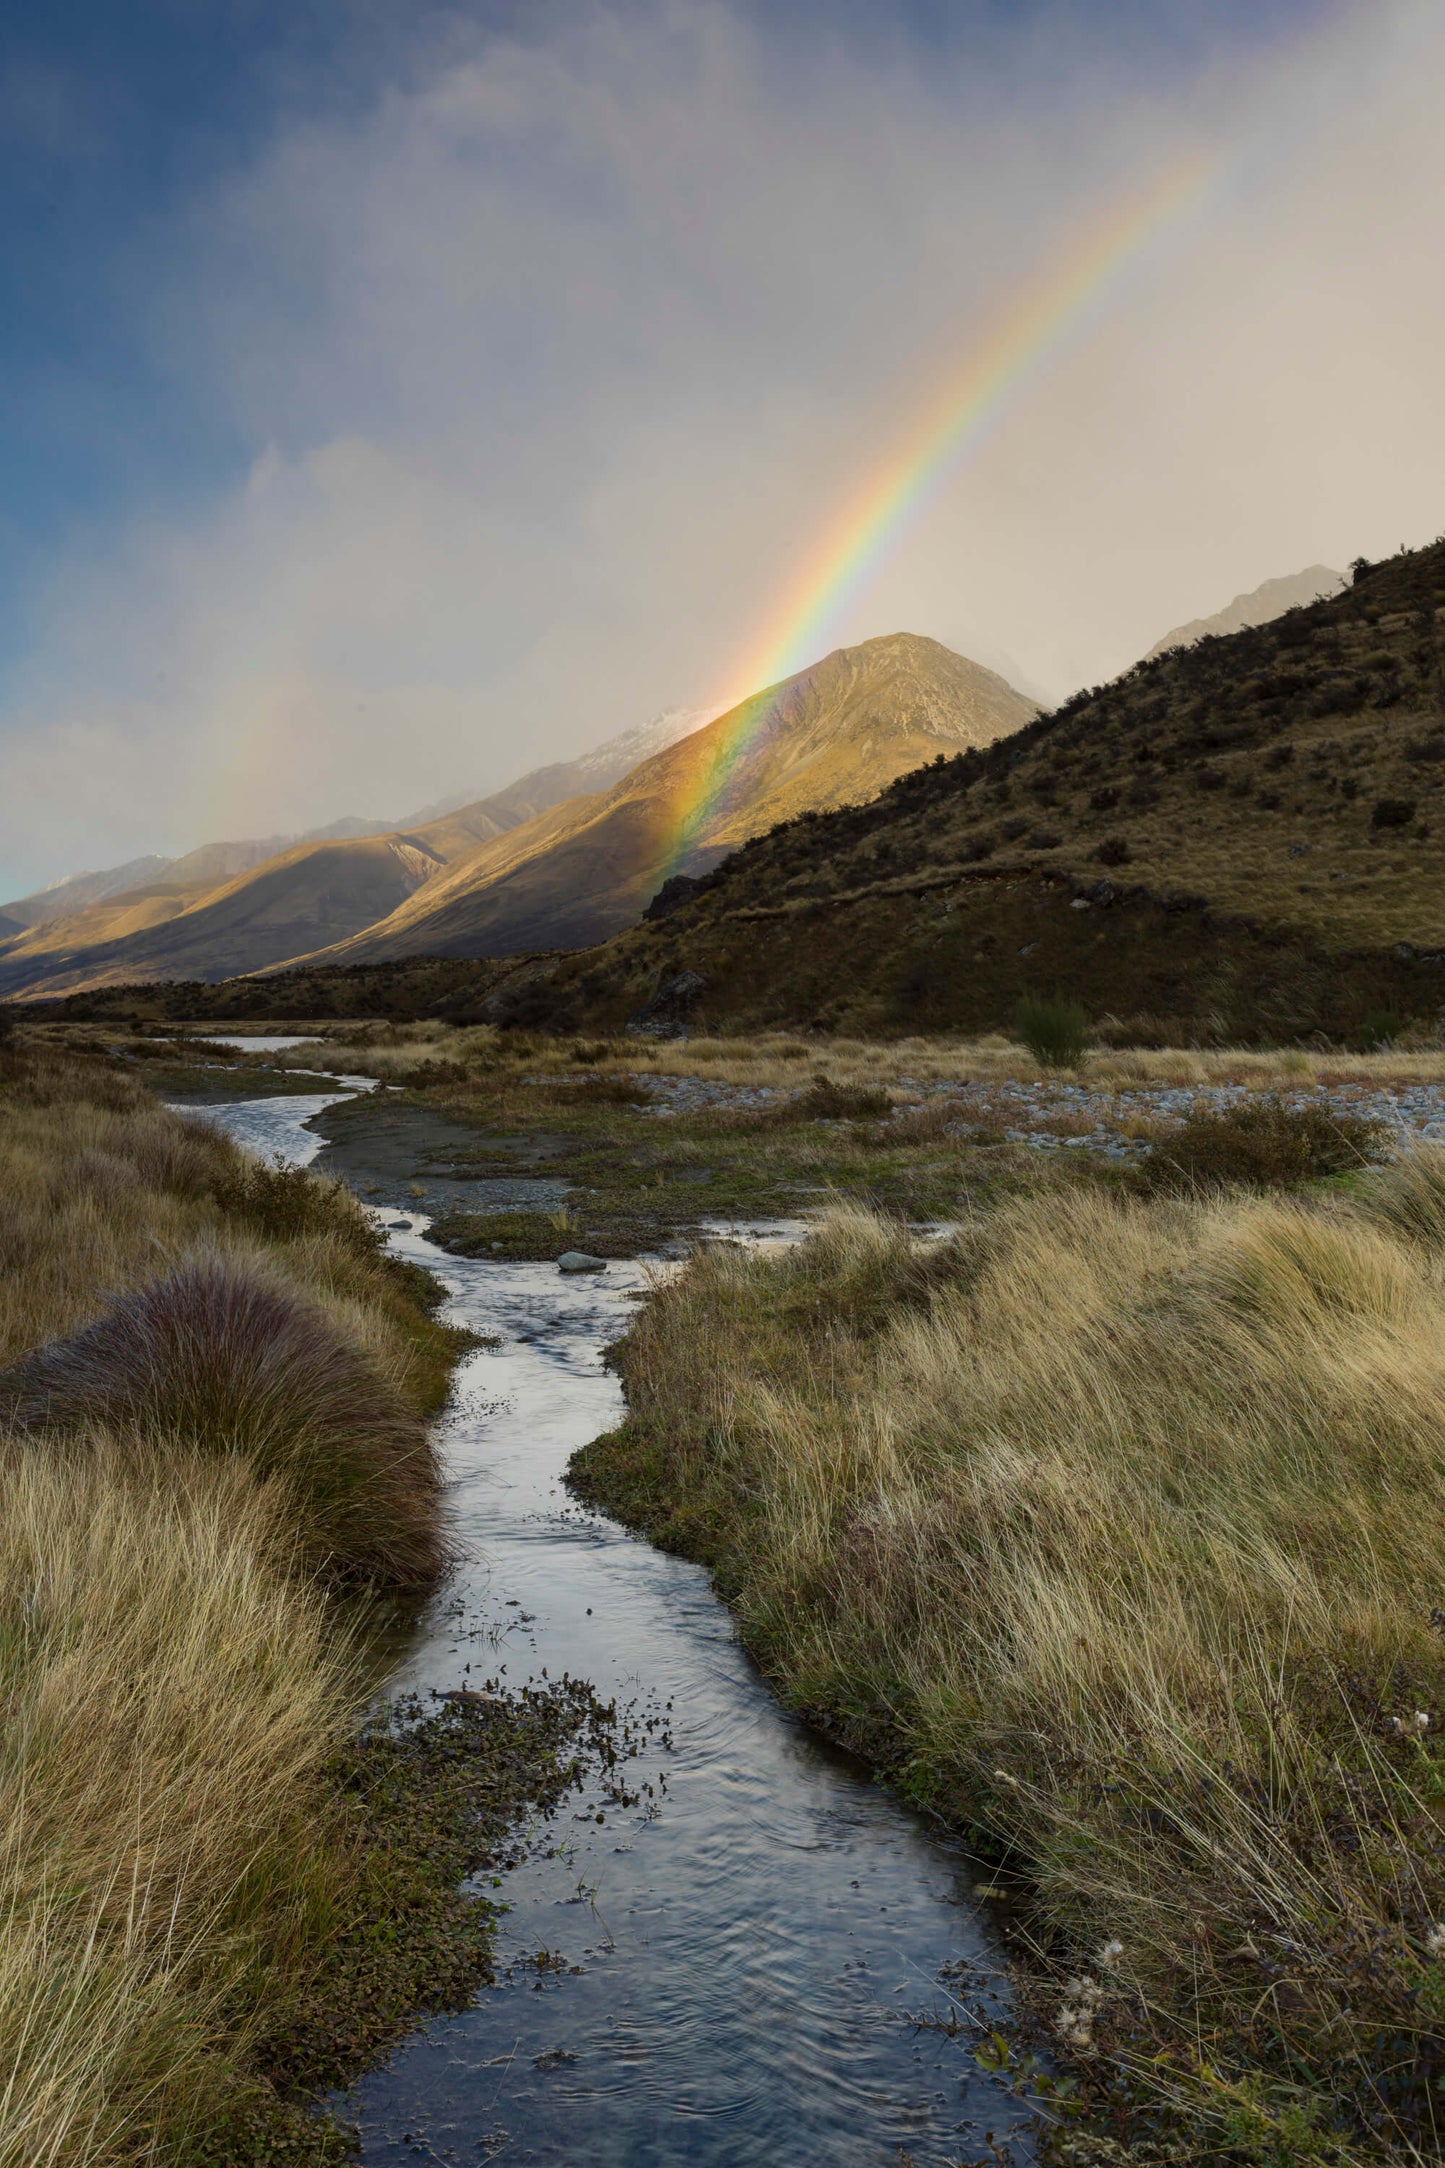 End of rainbow after a rainstorm near Mt. Cook on New Zealand's South Island